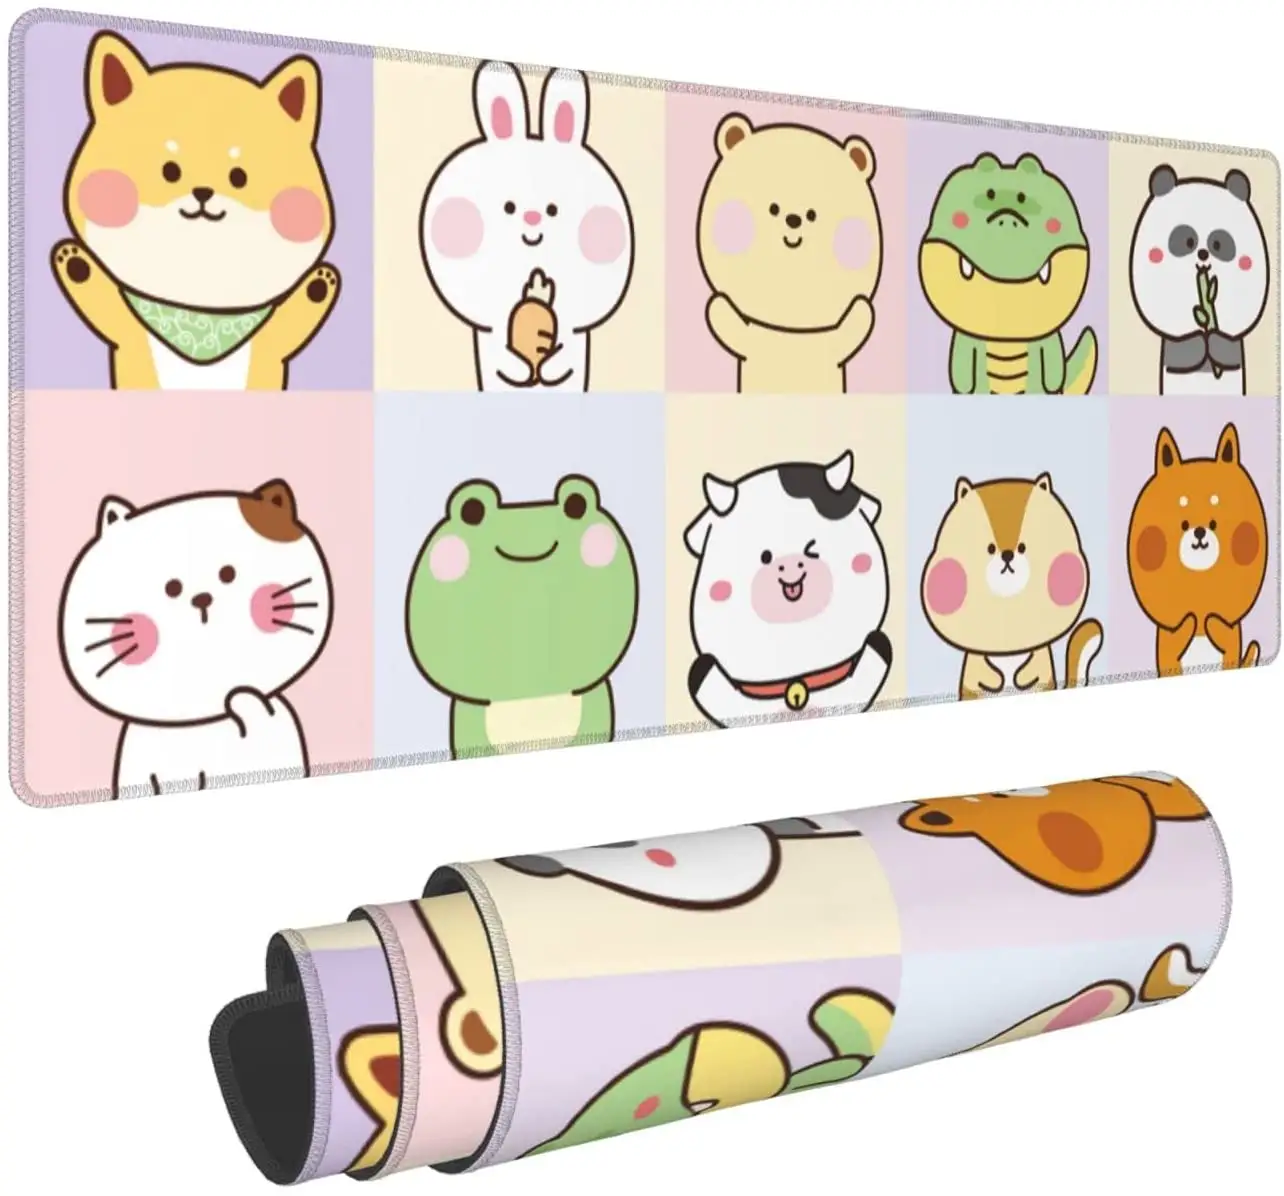 70*30cm Kawaii Animals Gaming Mouse Pad Large XL Cute Desk Mat Long Extended Pads Big Mousepad for Home Office Decor Accessories